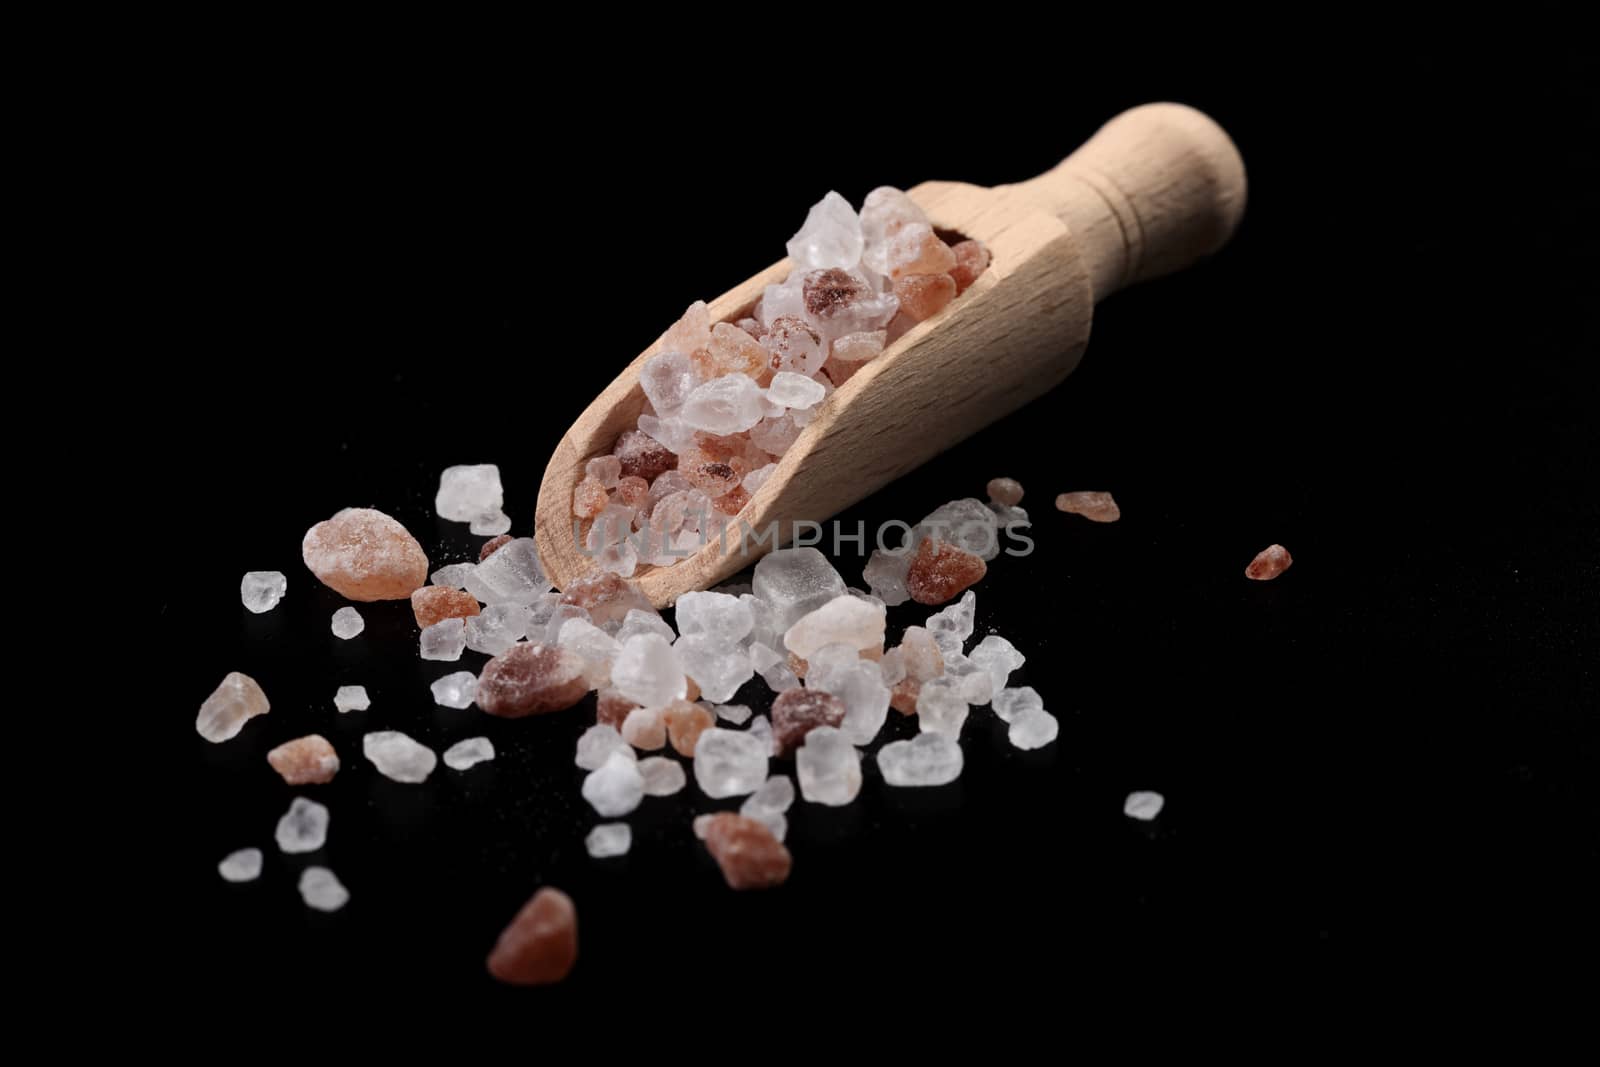 Wood Spice Spoon With Himalayan Salt on Black Background